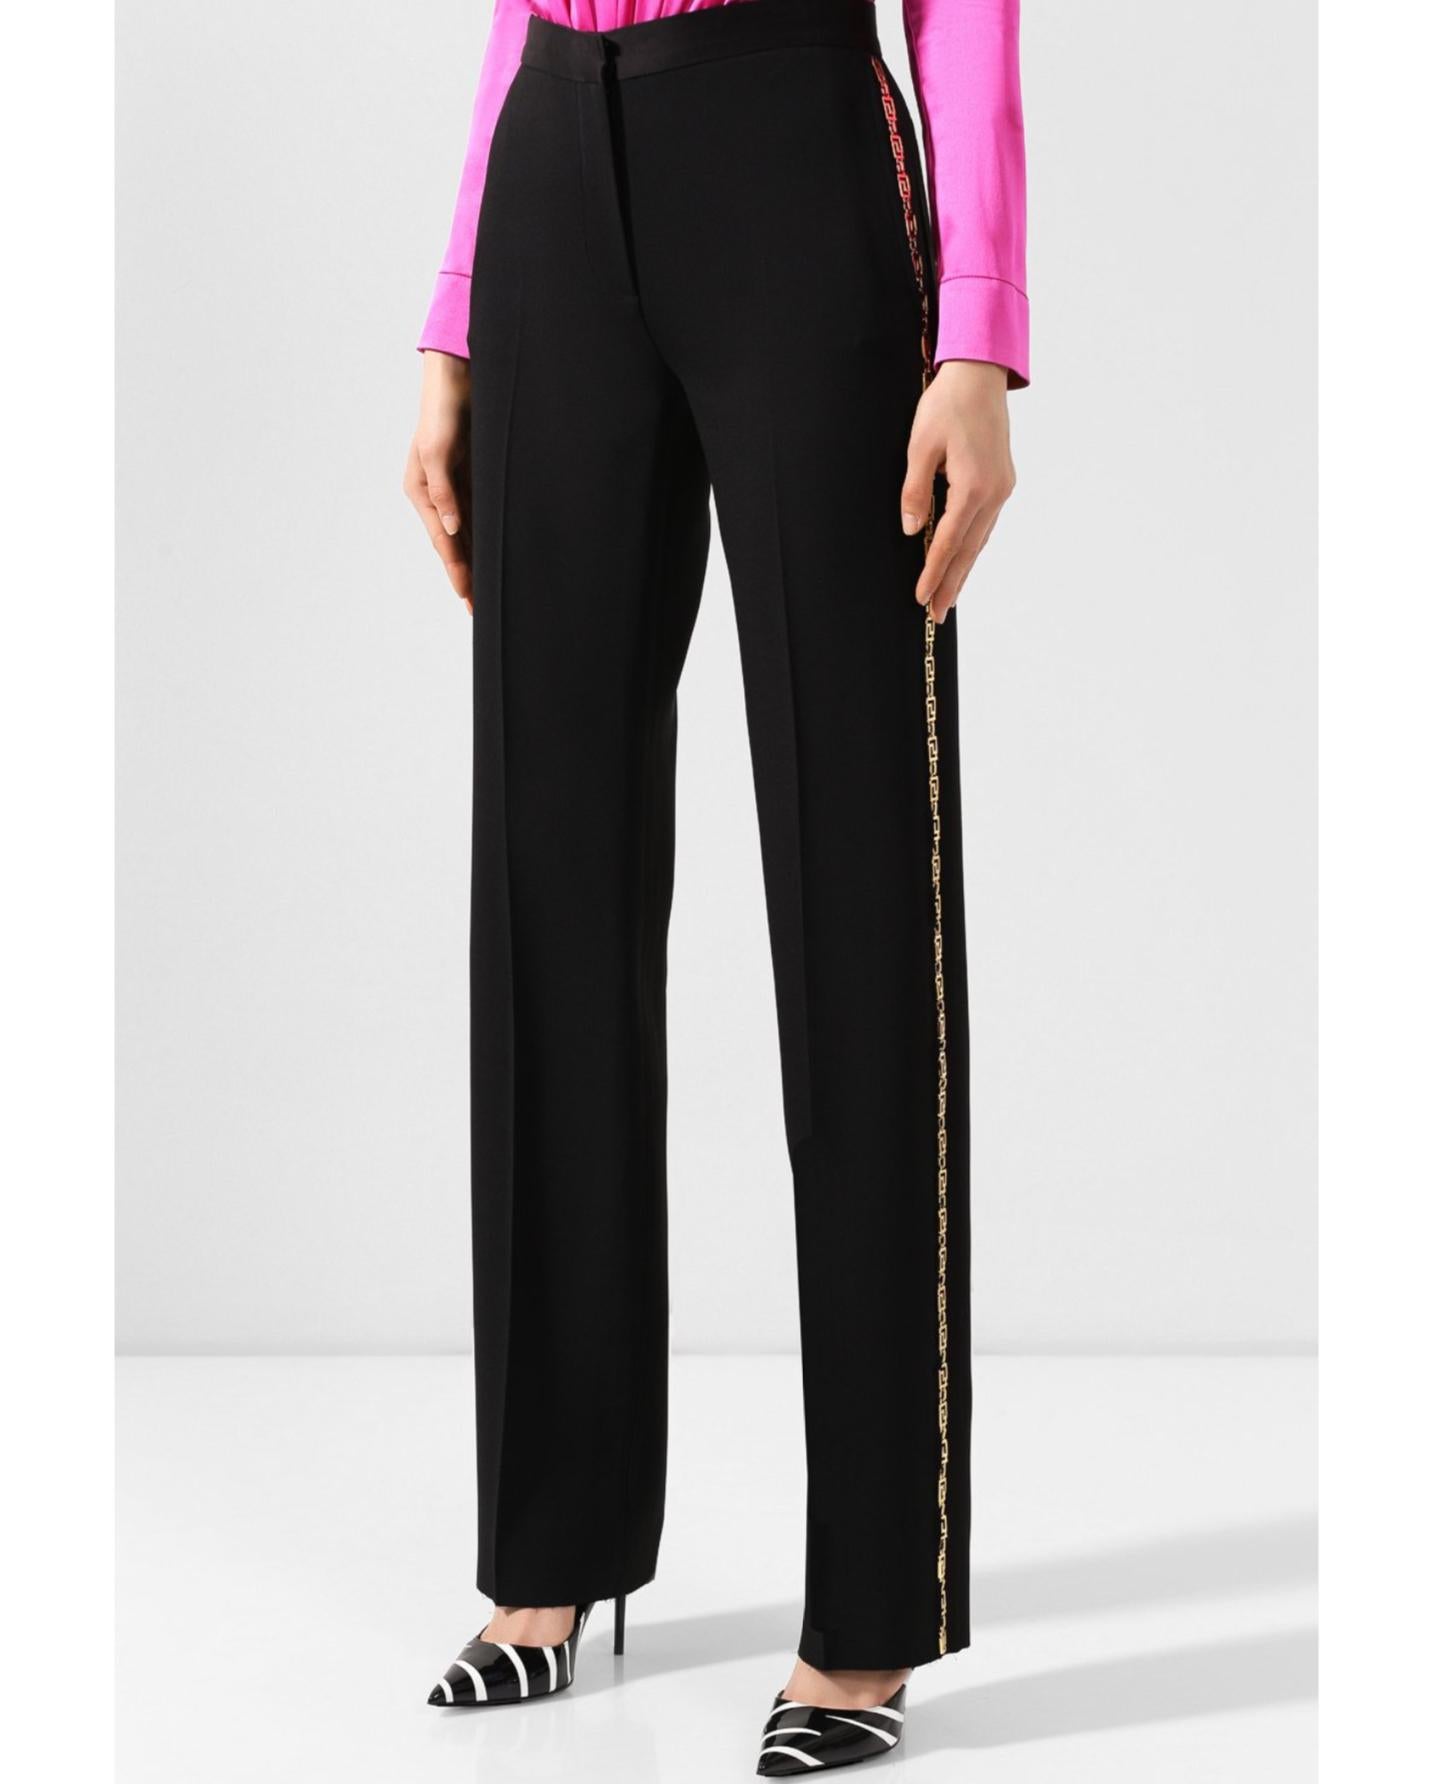 Versace Gold Tone Greca Chain Tailored Black Trousers / Pants Size 38 For Sale 1